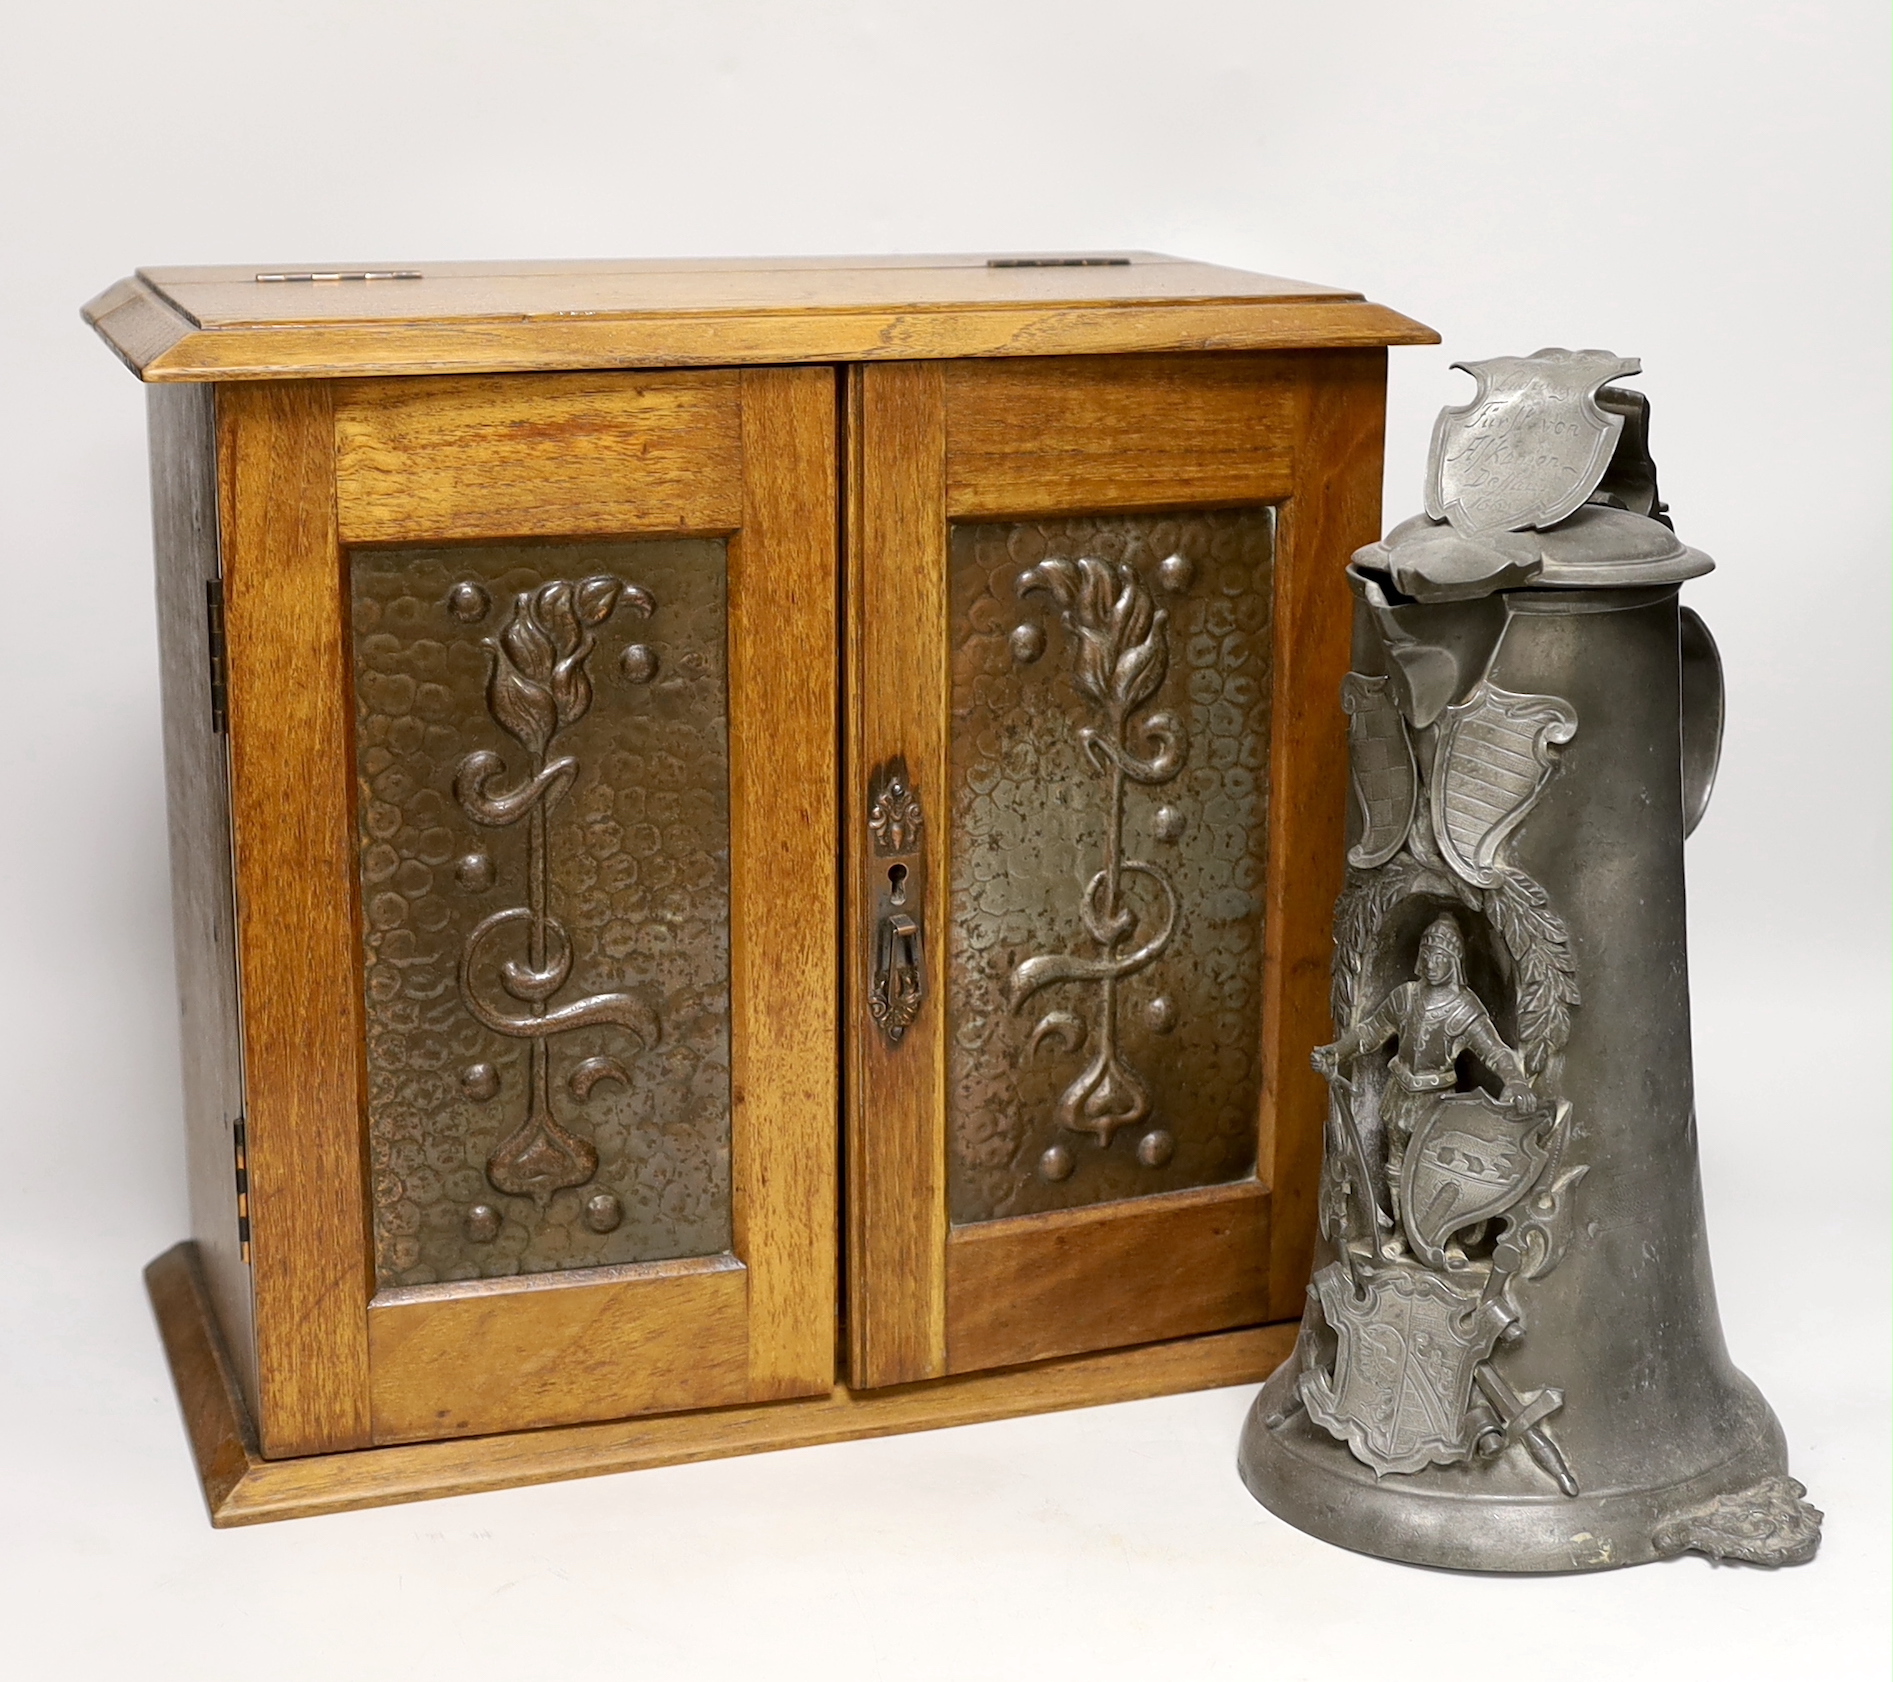 A German pewter commemorative flagon and an Art Nouveau smoker's cabinet